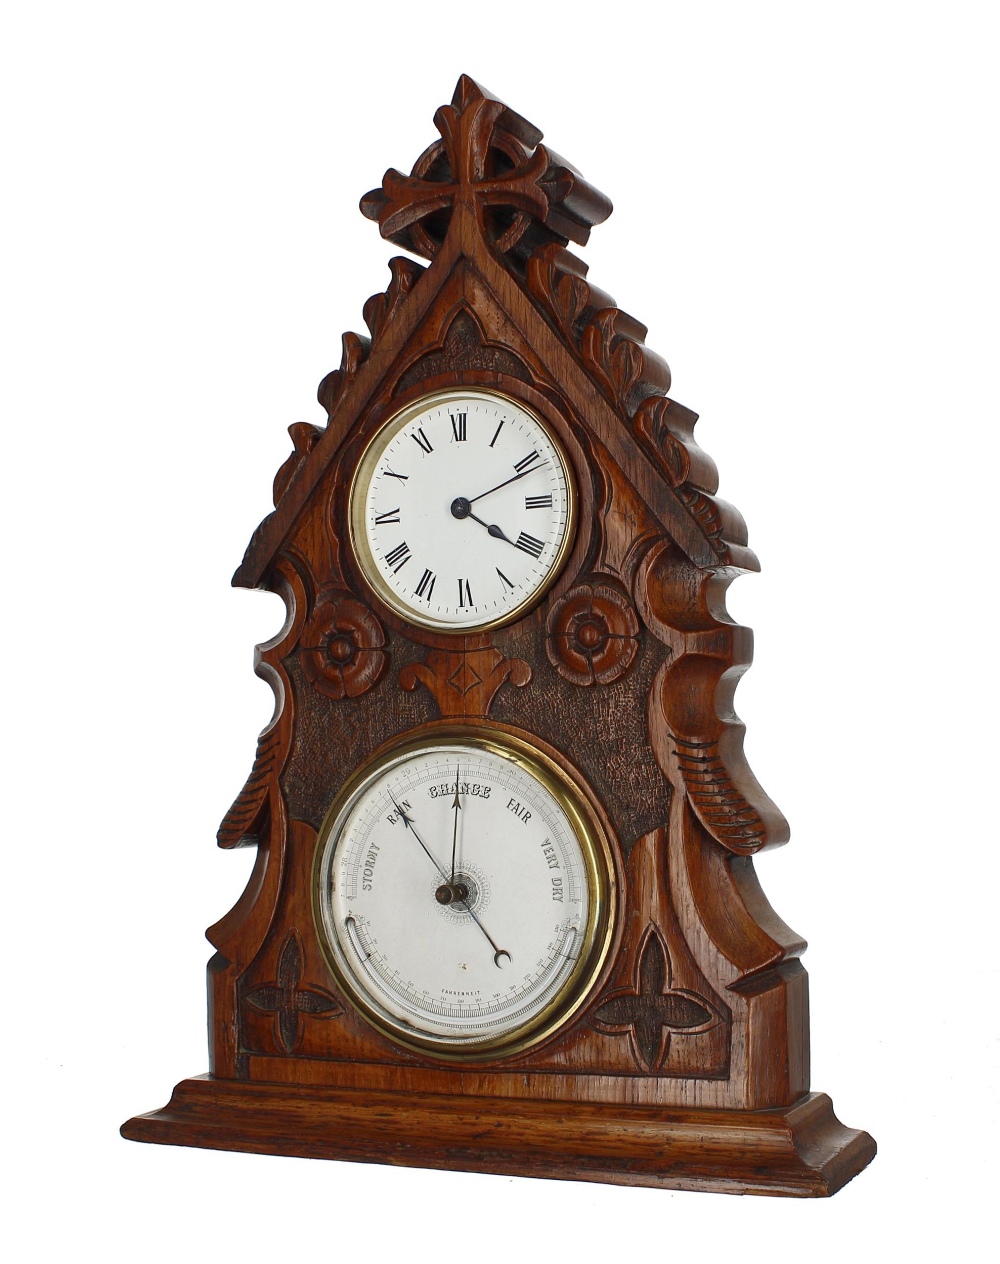 Gothic carved oak shelf clock / barometer compendium, the case with a roof pitch surmounted by a